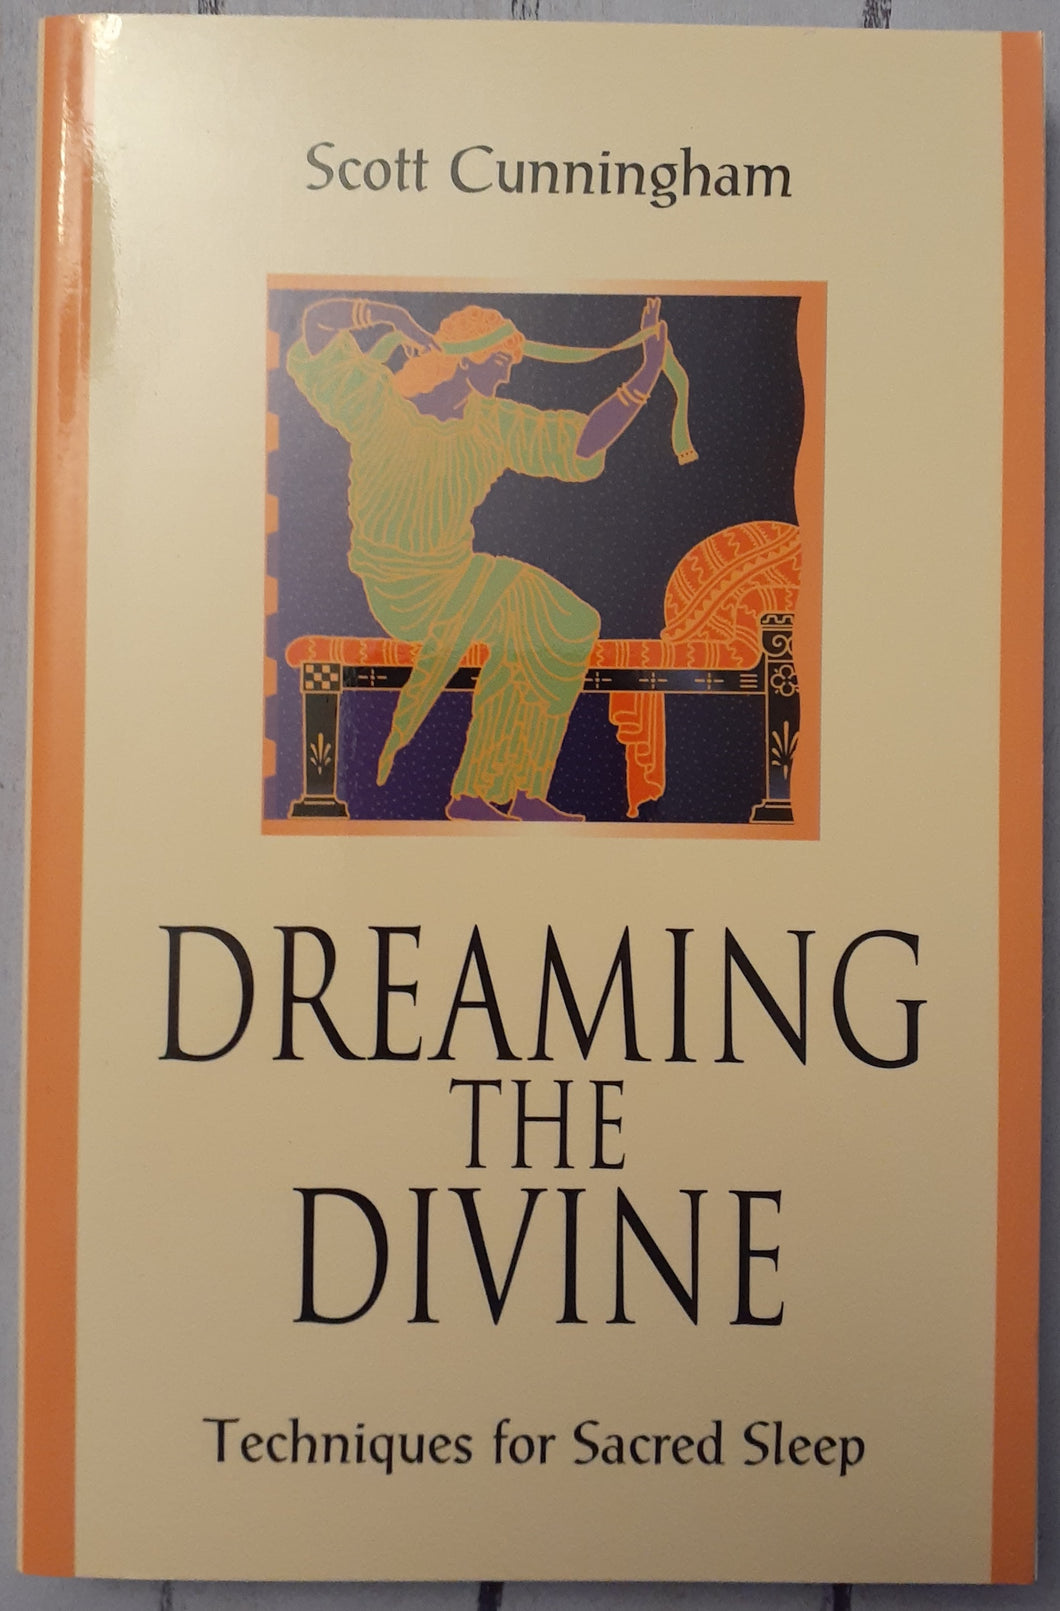 Dreaming the Divine: Techniques for Sacred Sleep